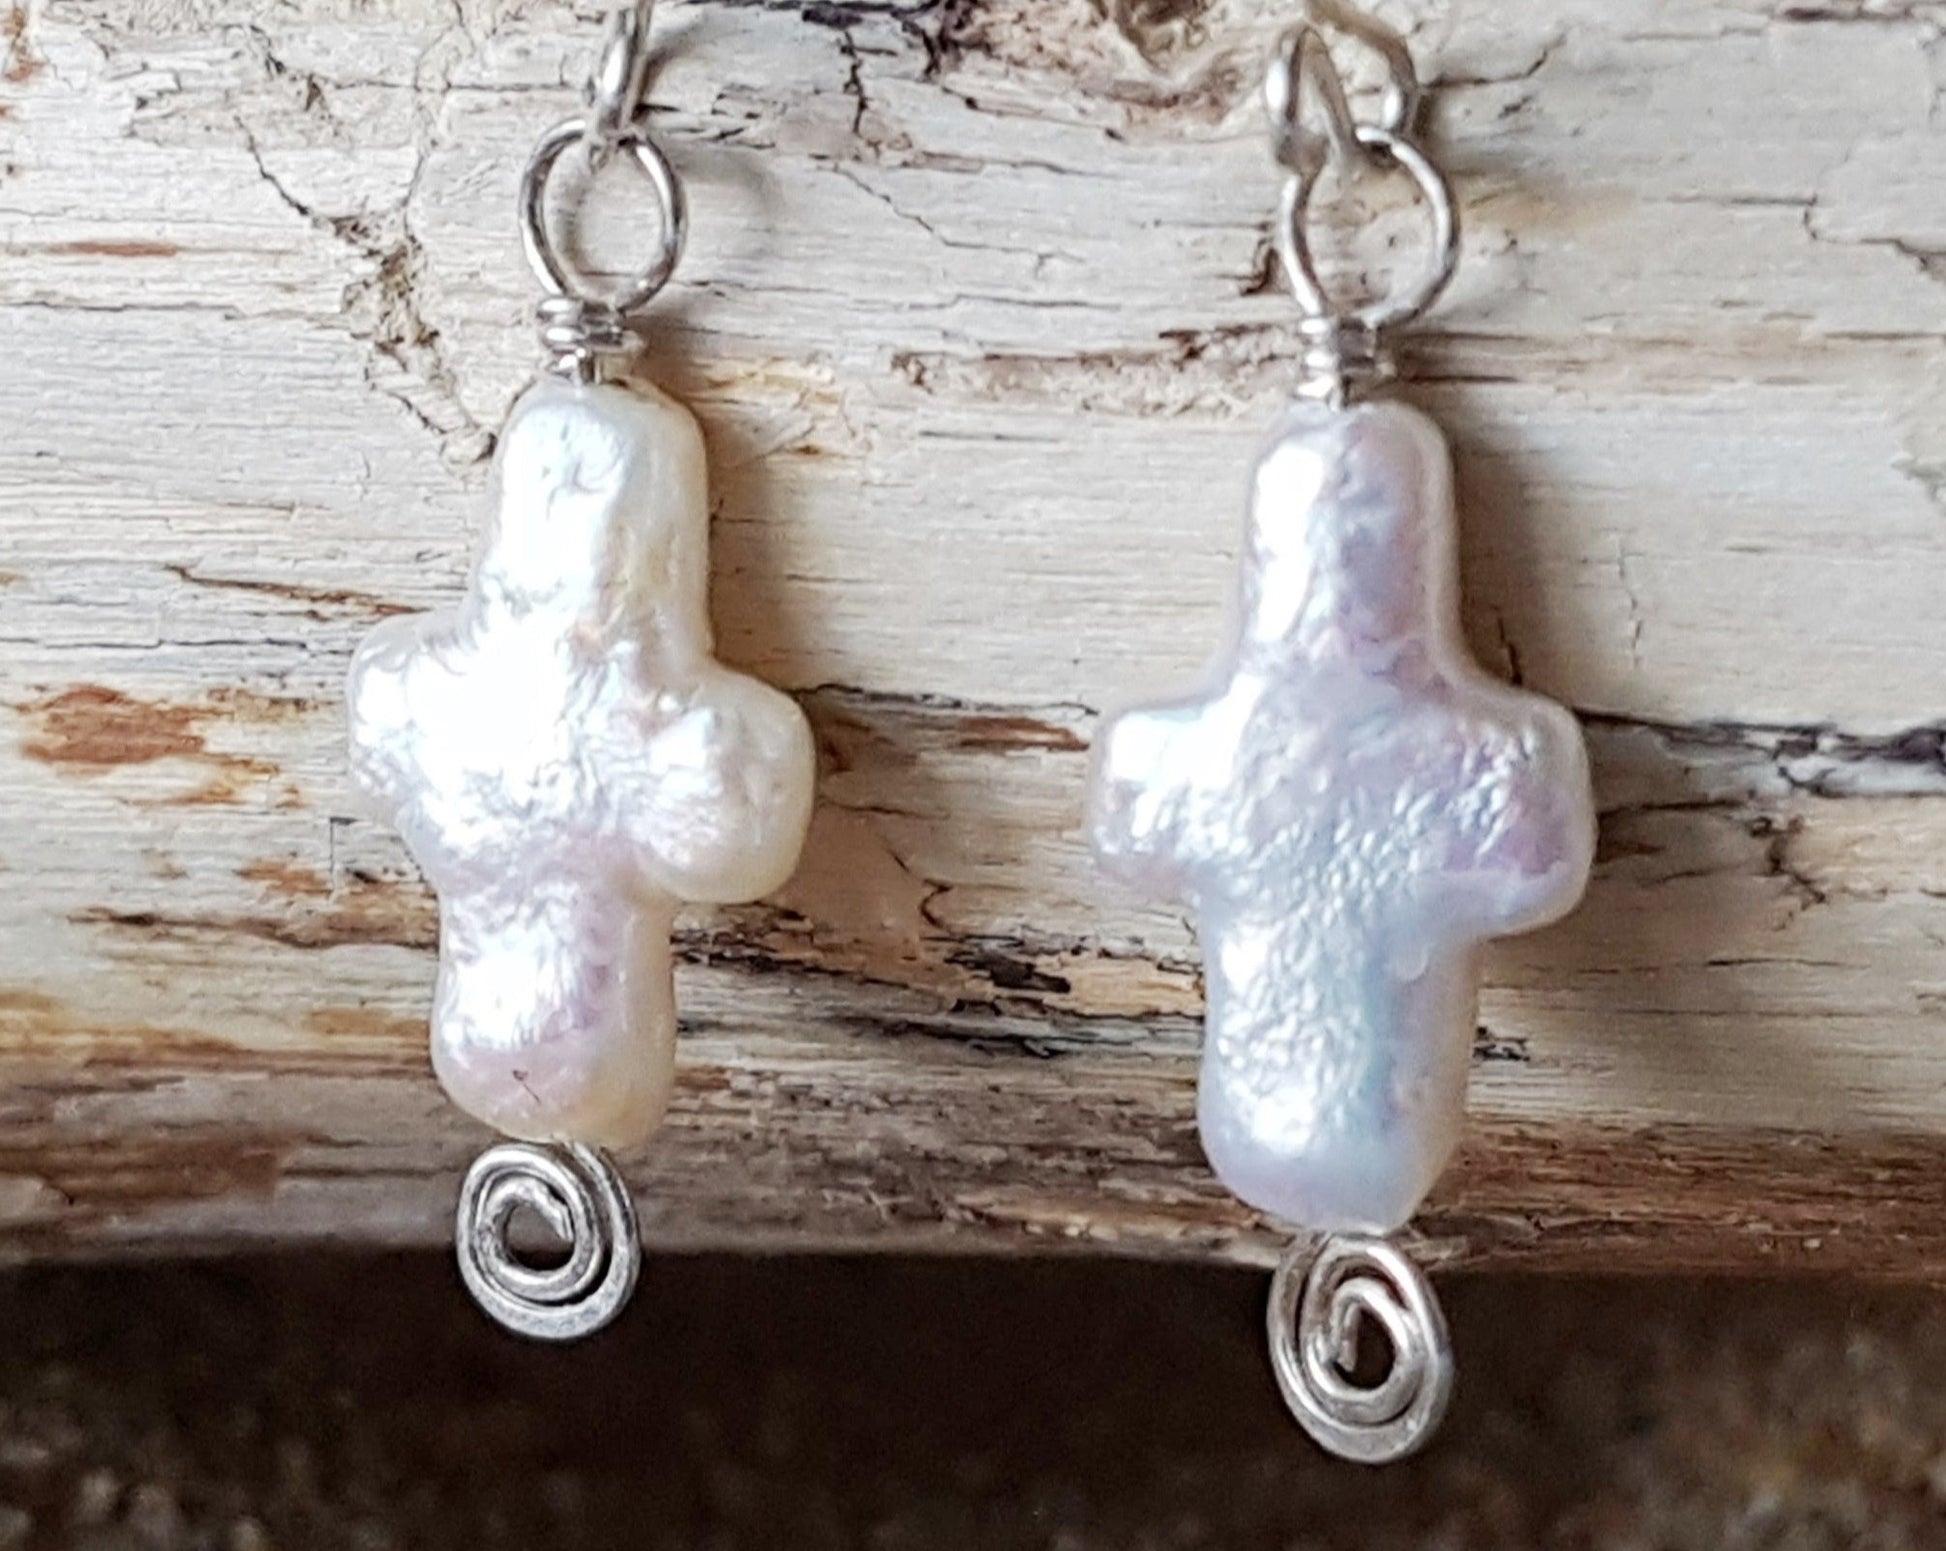      Celtic Inspired, White Pearl Cross Earrings with Eternity Coils, Freshwater Cultured Pearls and Sterling Silver.